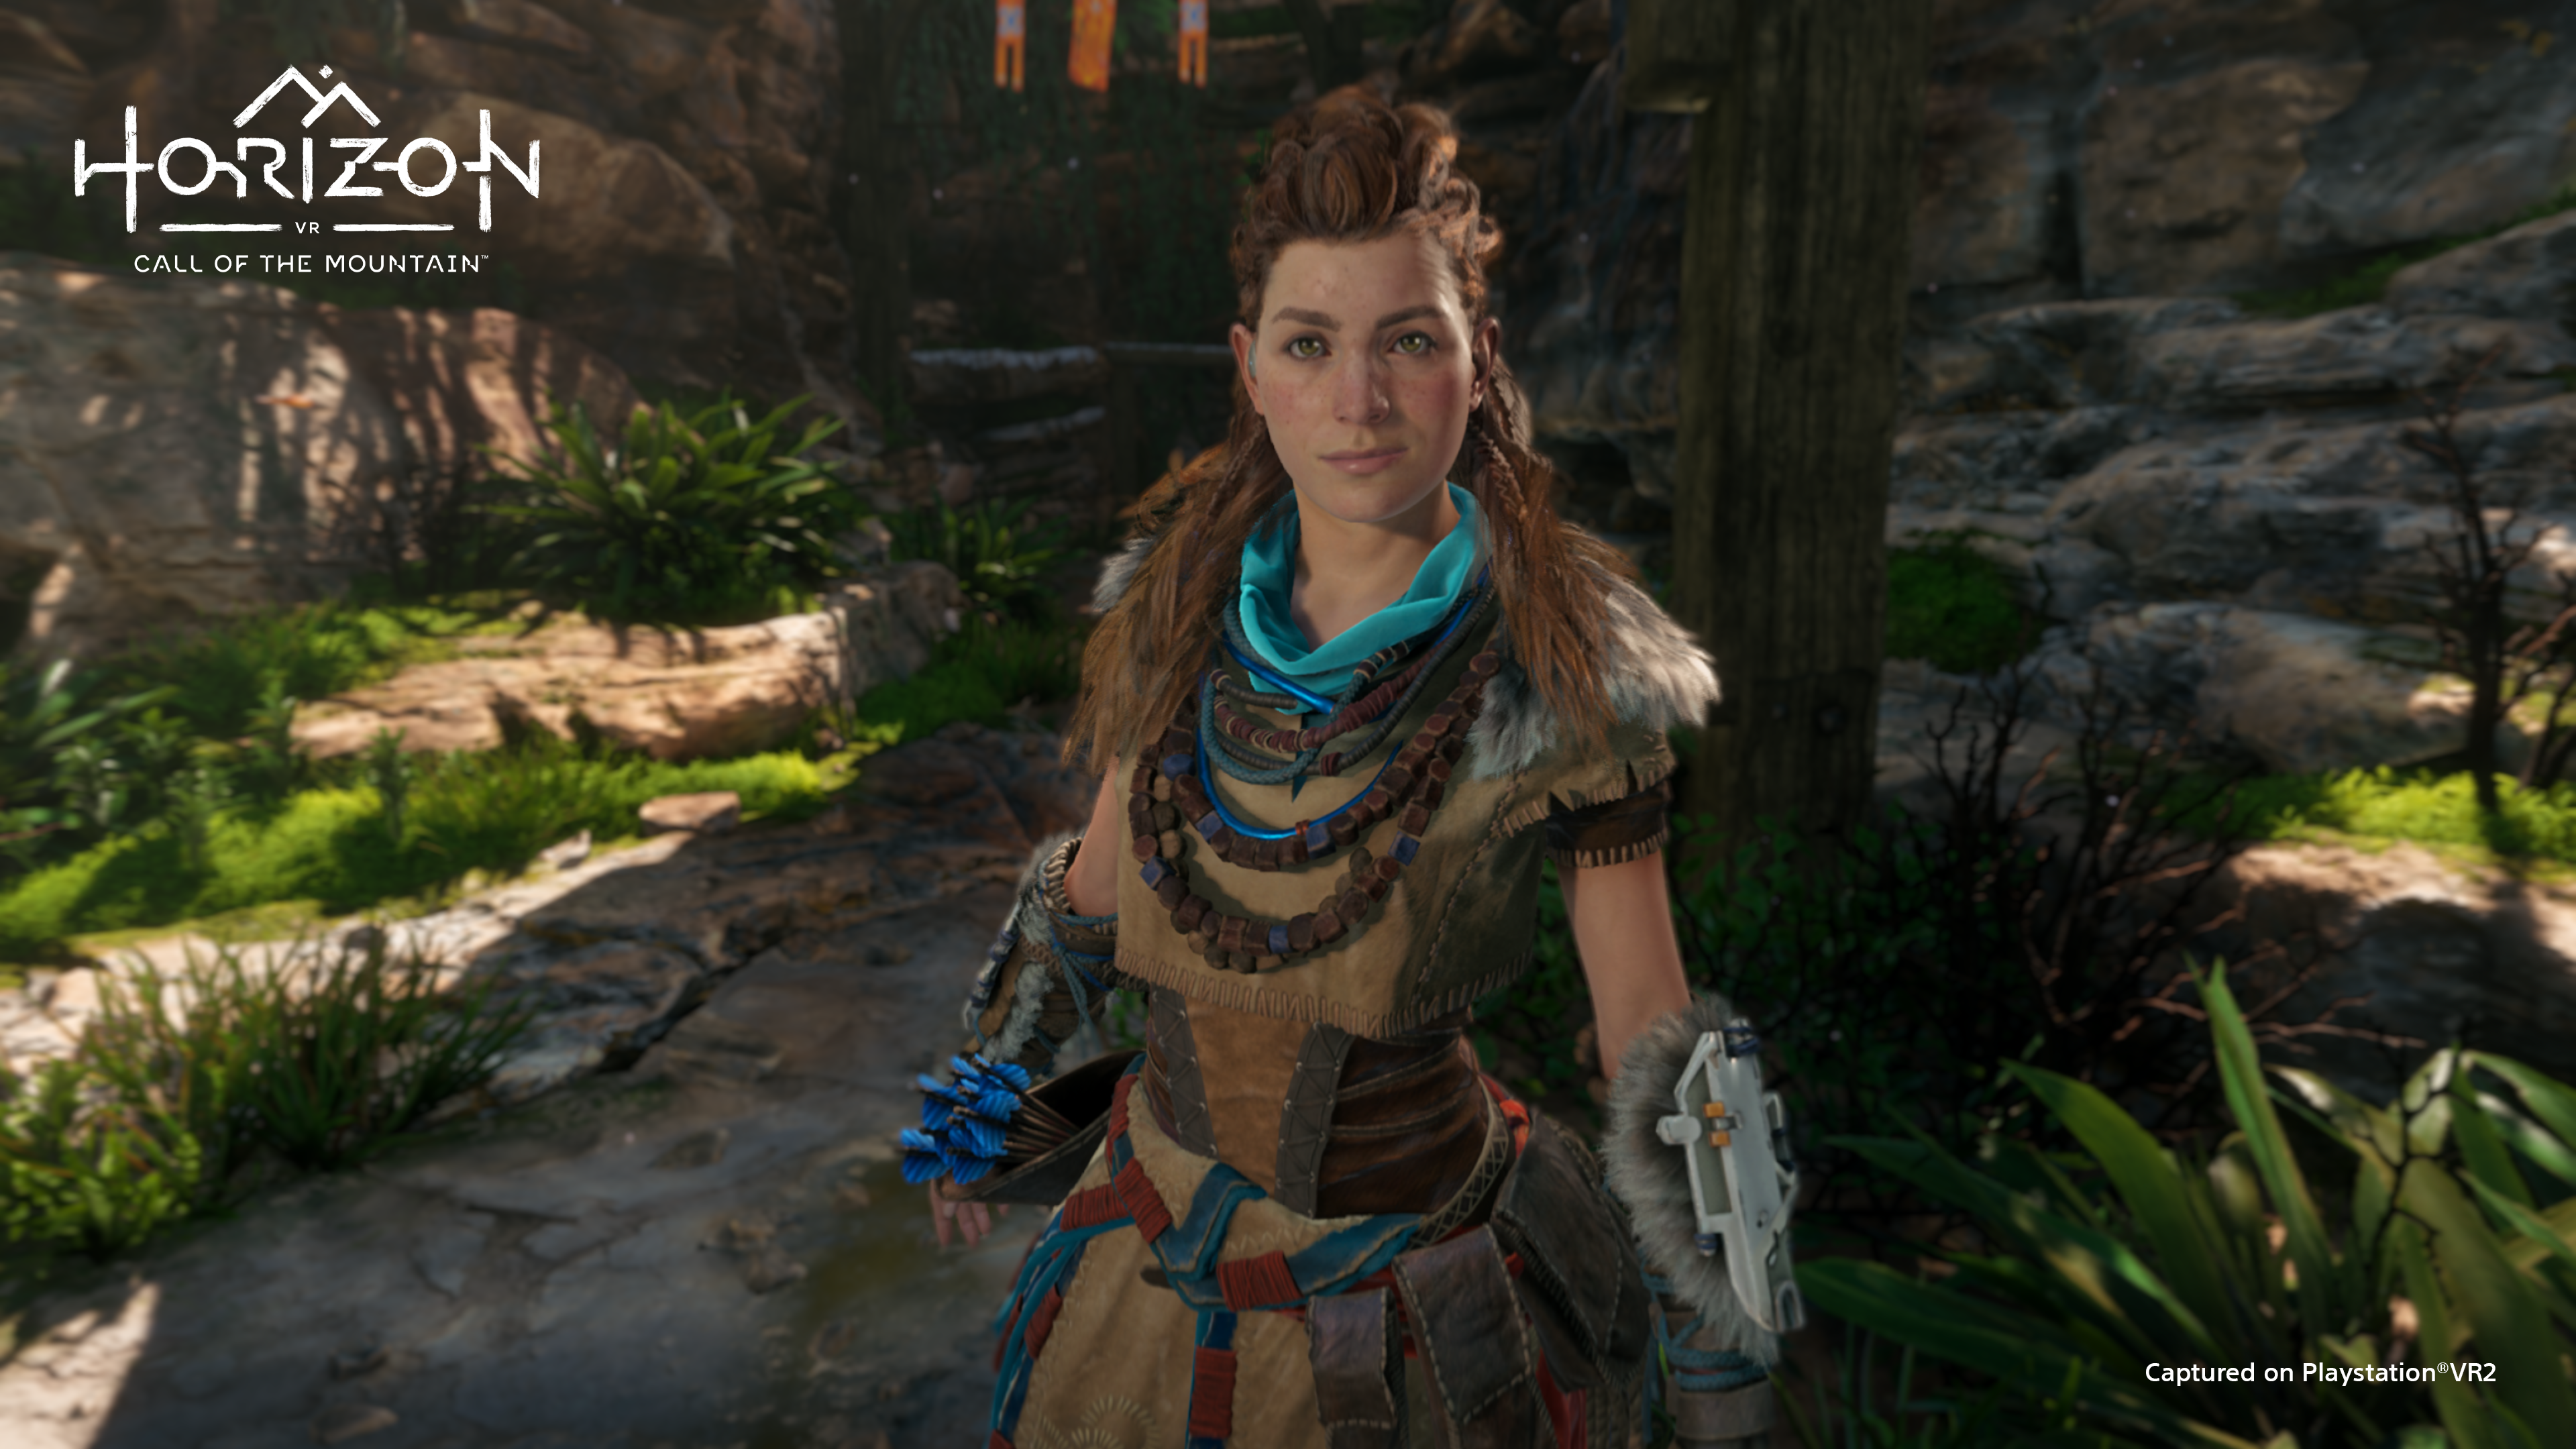 Screenshot featuring Alloy, the character from the original Horizon games